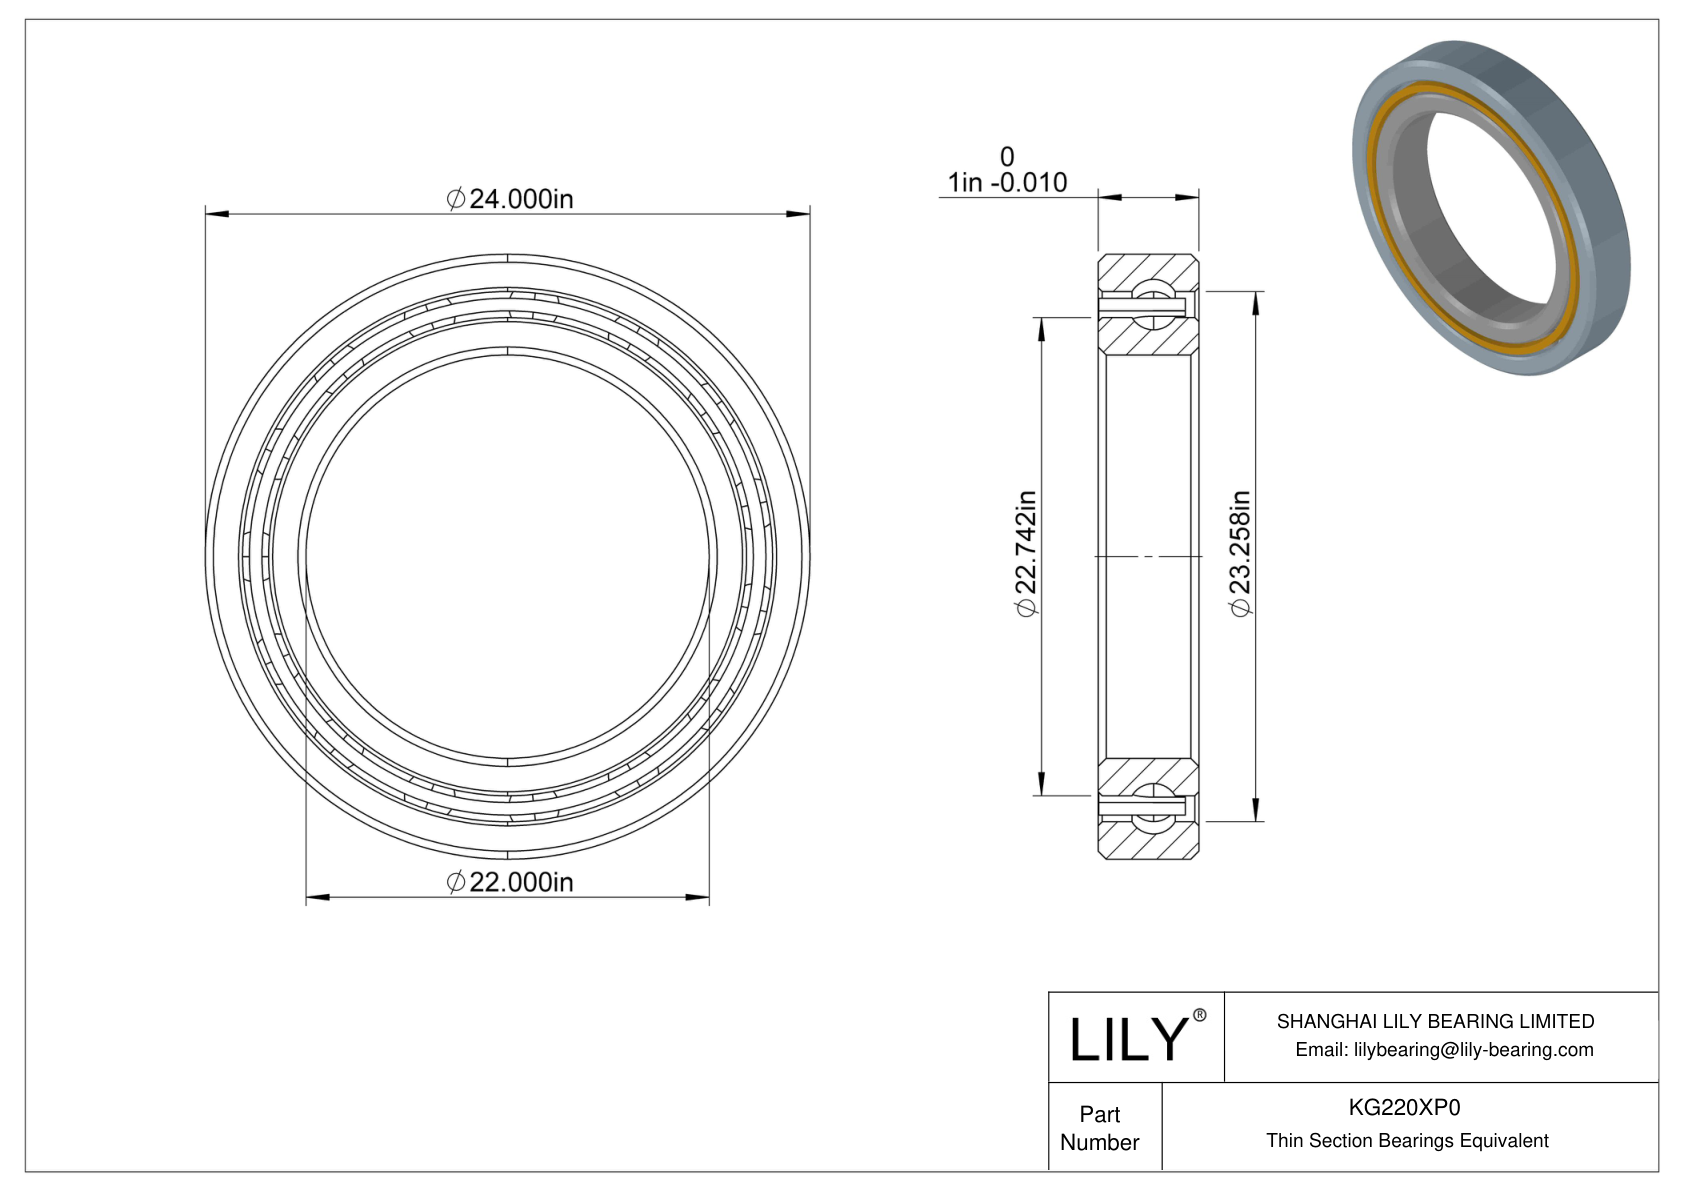 KG220XP0 Constant Section (CS) Bearings cad drawing